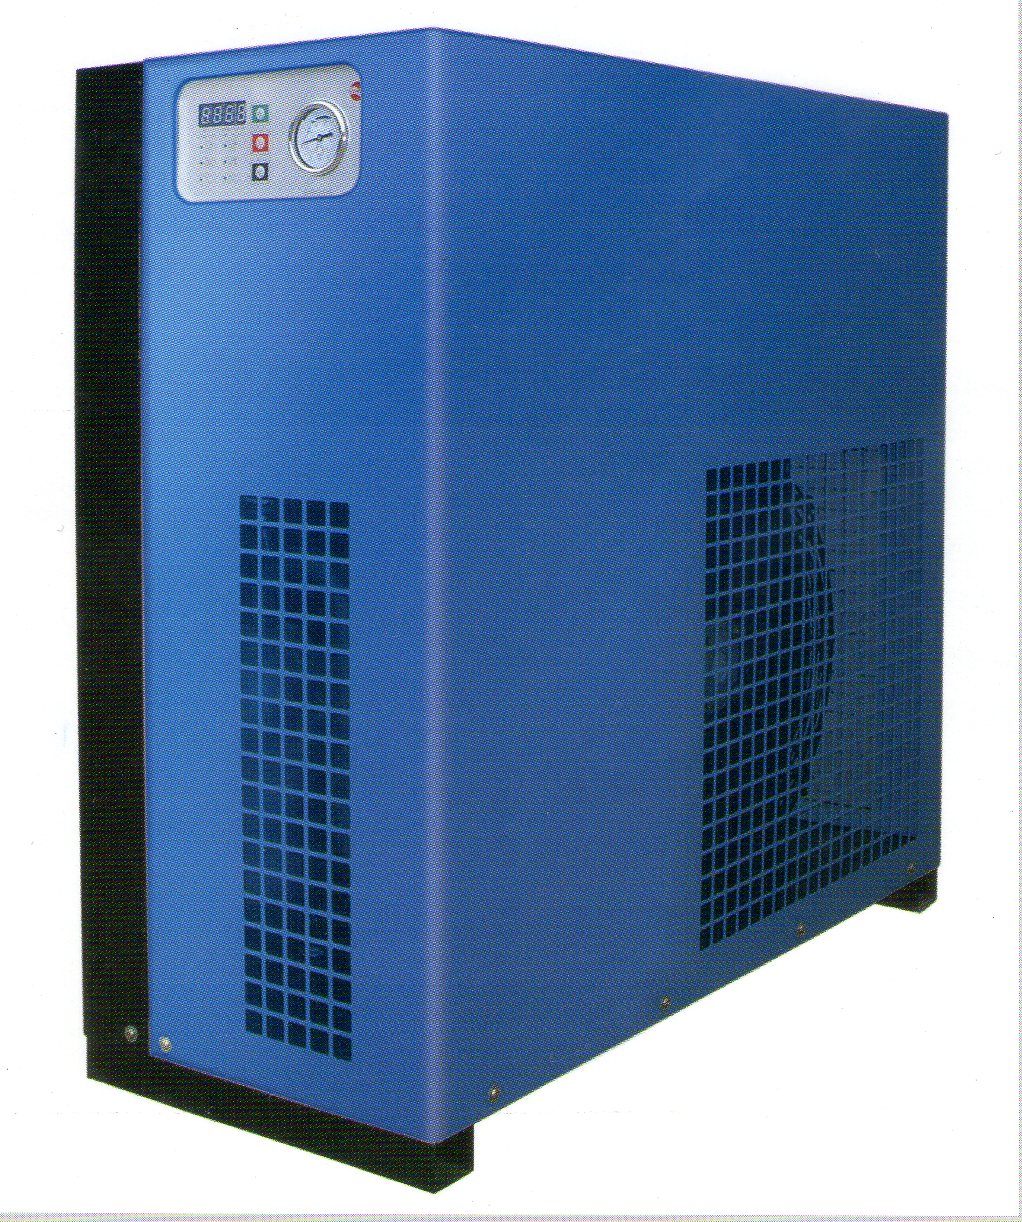 Xebec Refrigerated Air Dryer 0.6m3/min or 21.3cfm